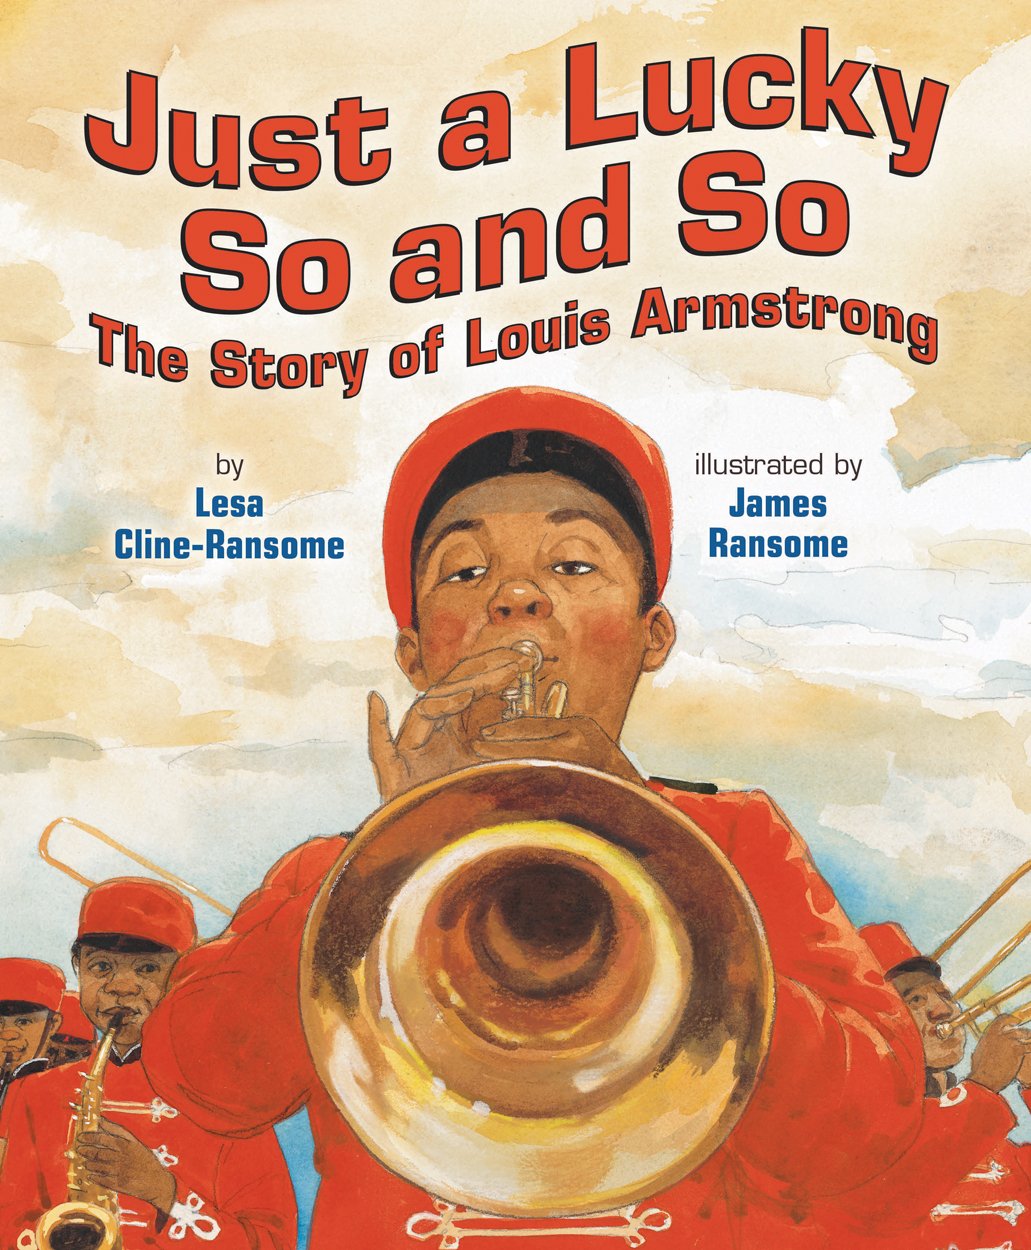 Just a Lucky So and So: The Story of Louis Armstrong - Lesa Cline-Ransome